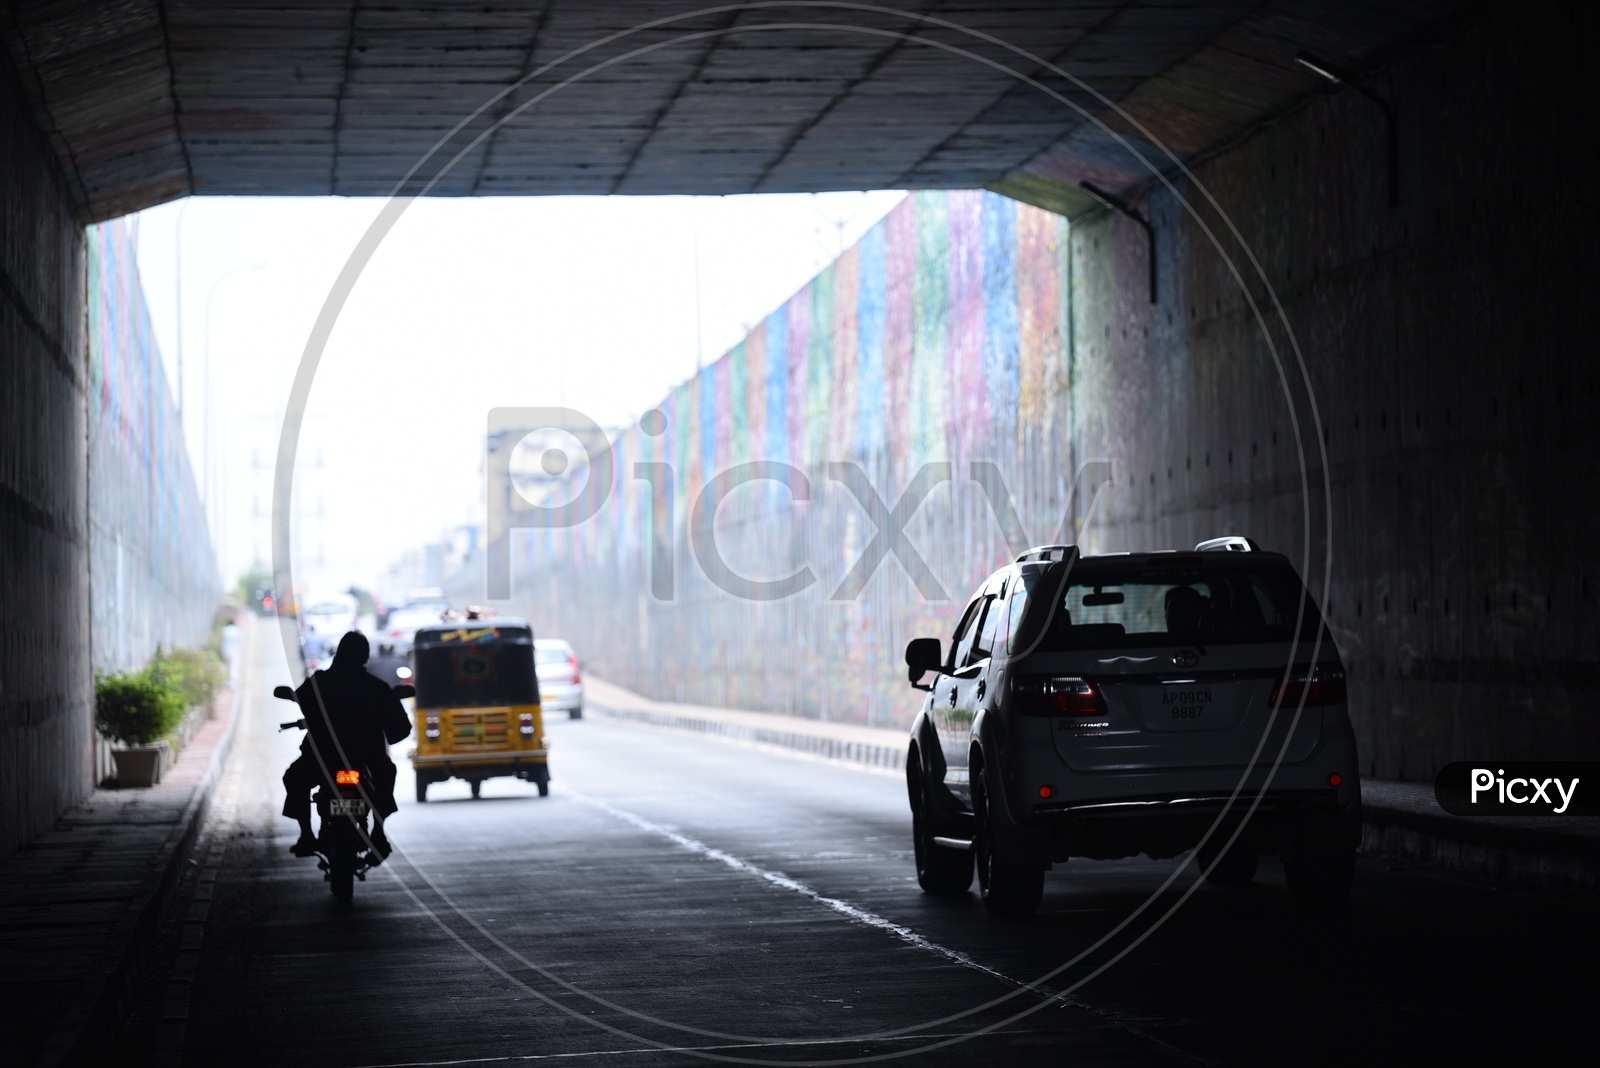 Silhouette of Vehicles Passing By a Underpass in Hyderabad